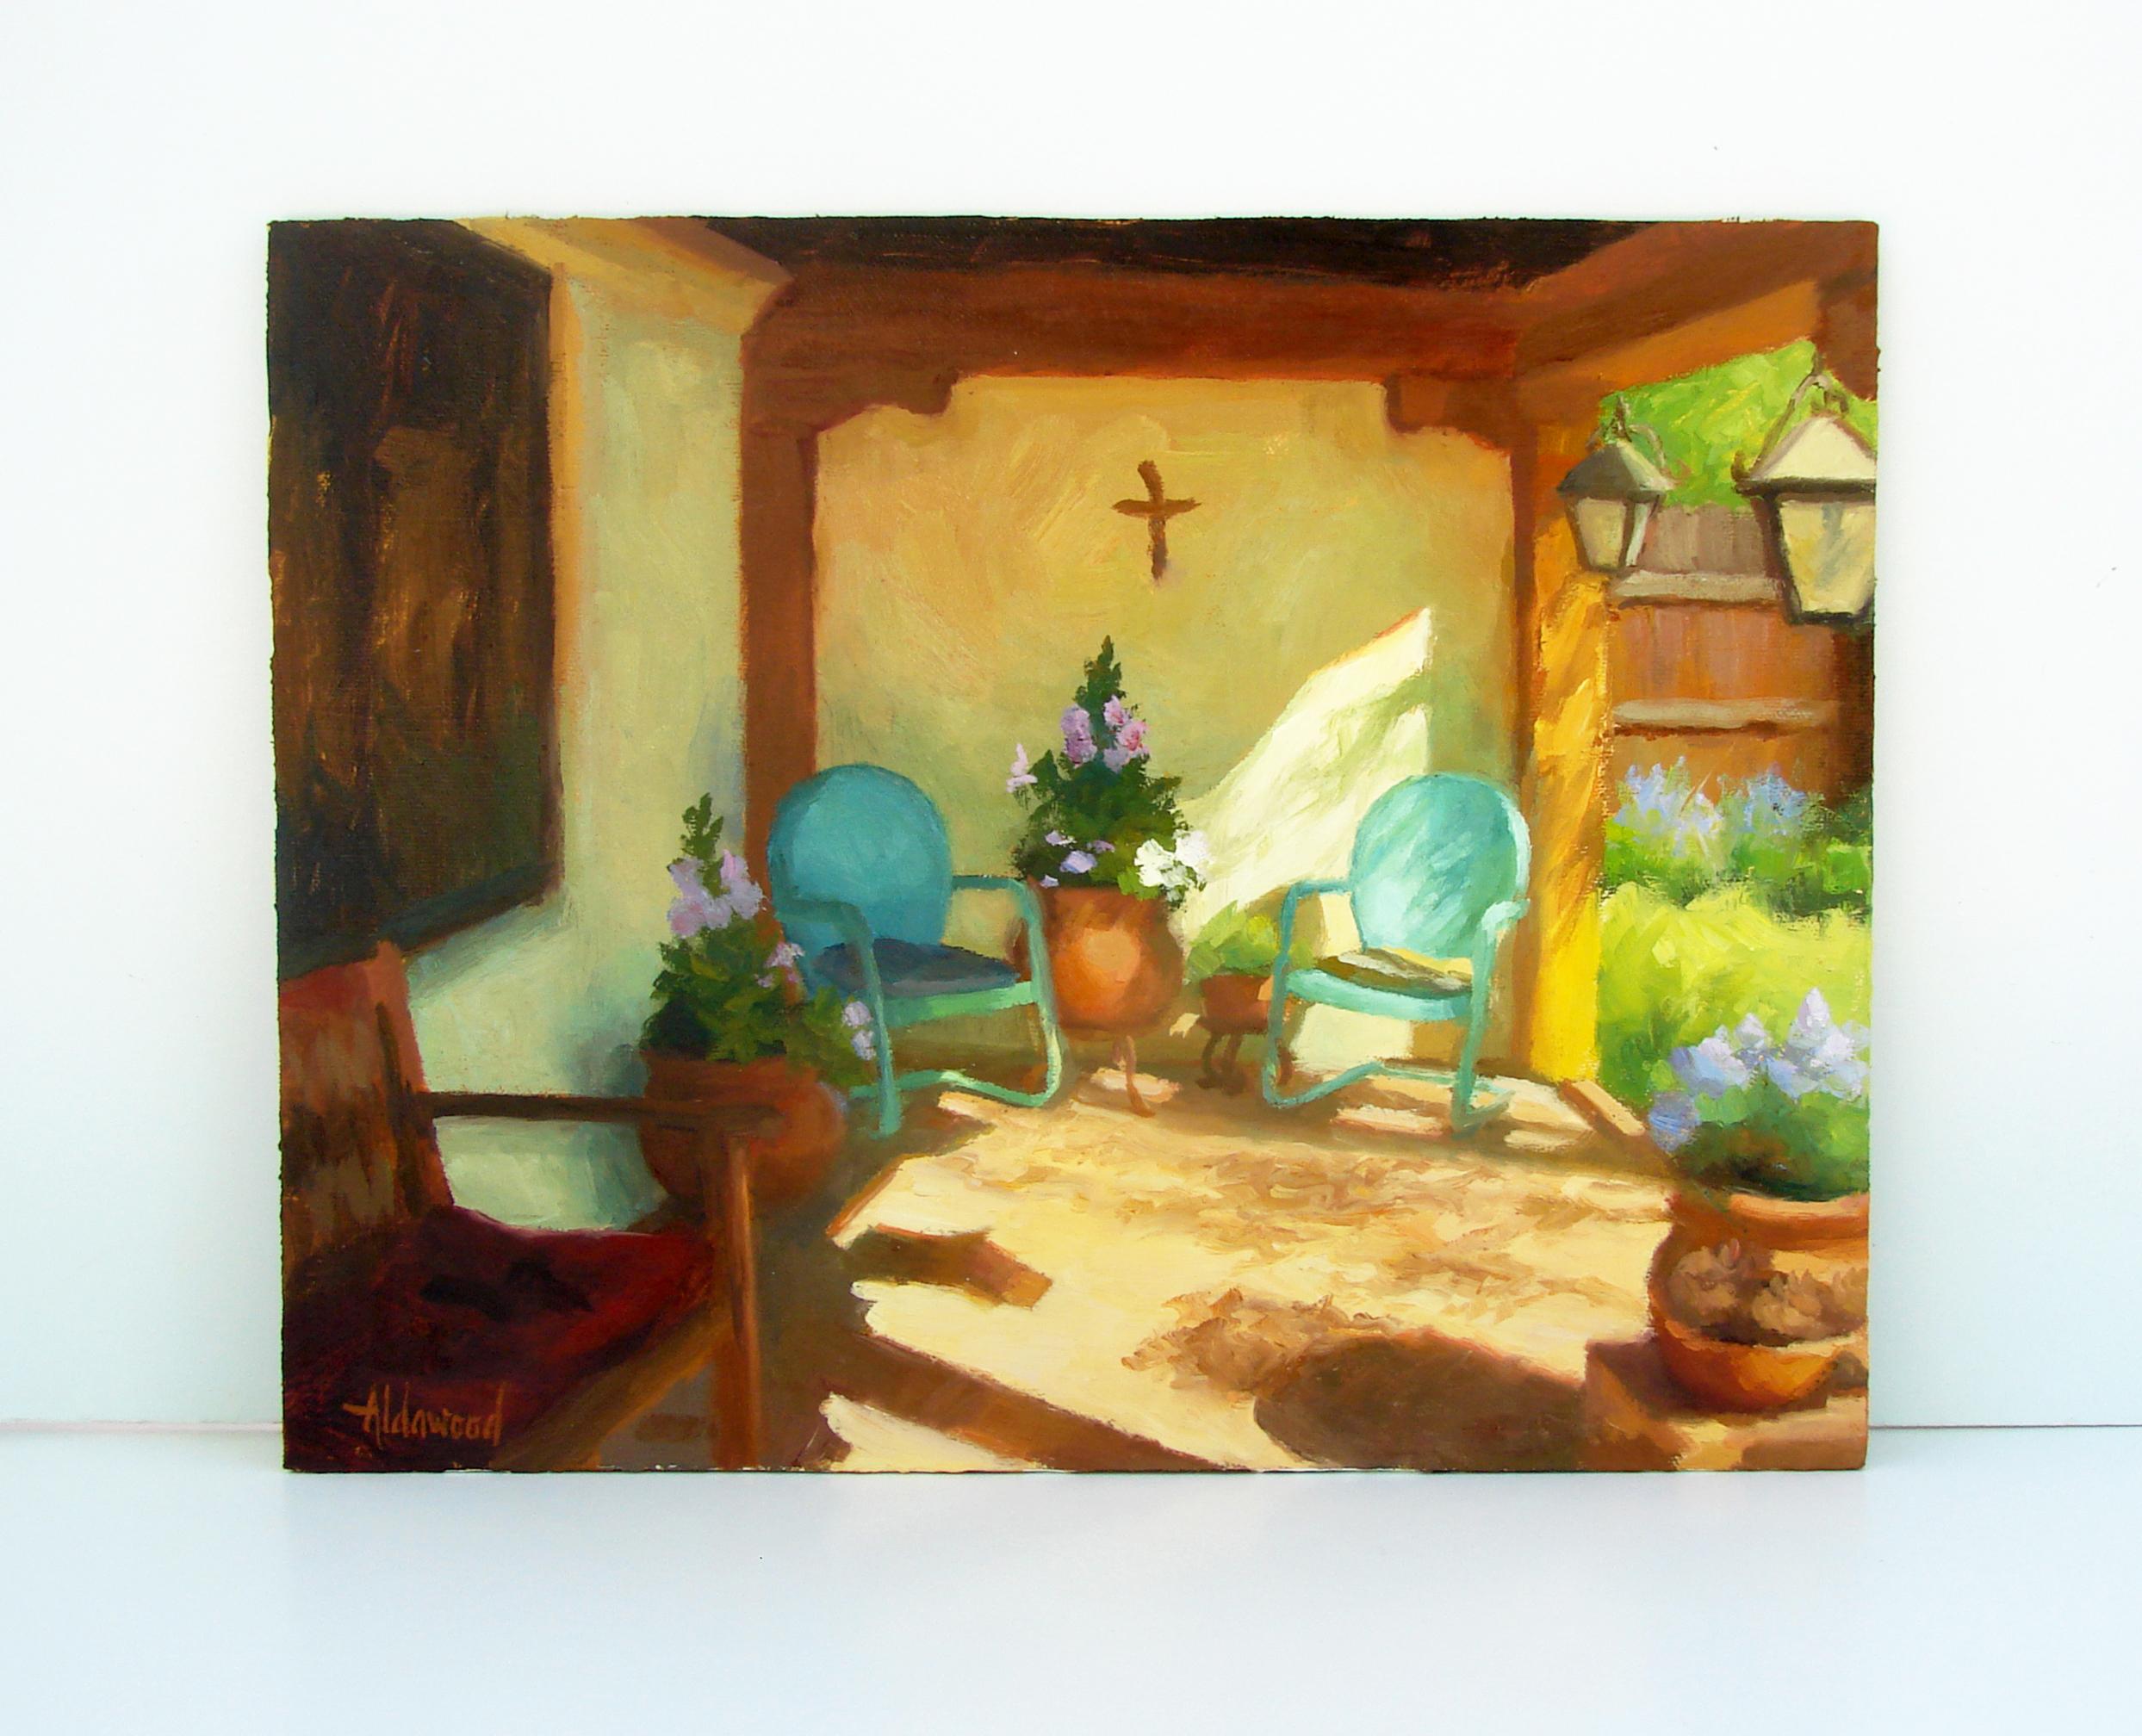 <p>Artist Comments<br>The bright morning sunshine floods a front porch where an inviting scene unfolds. Artist Sherri Aldawood was drawn to the light and cast shadows on this historic adobe home in Taos, New Mexico. The two turquoise chairs add to